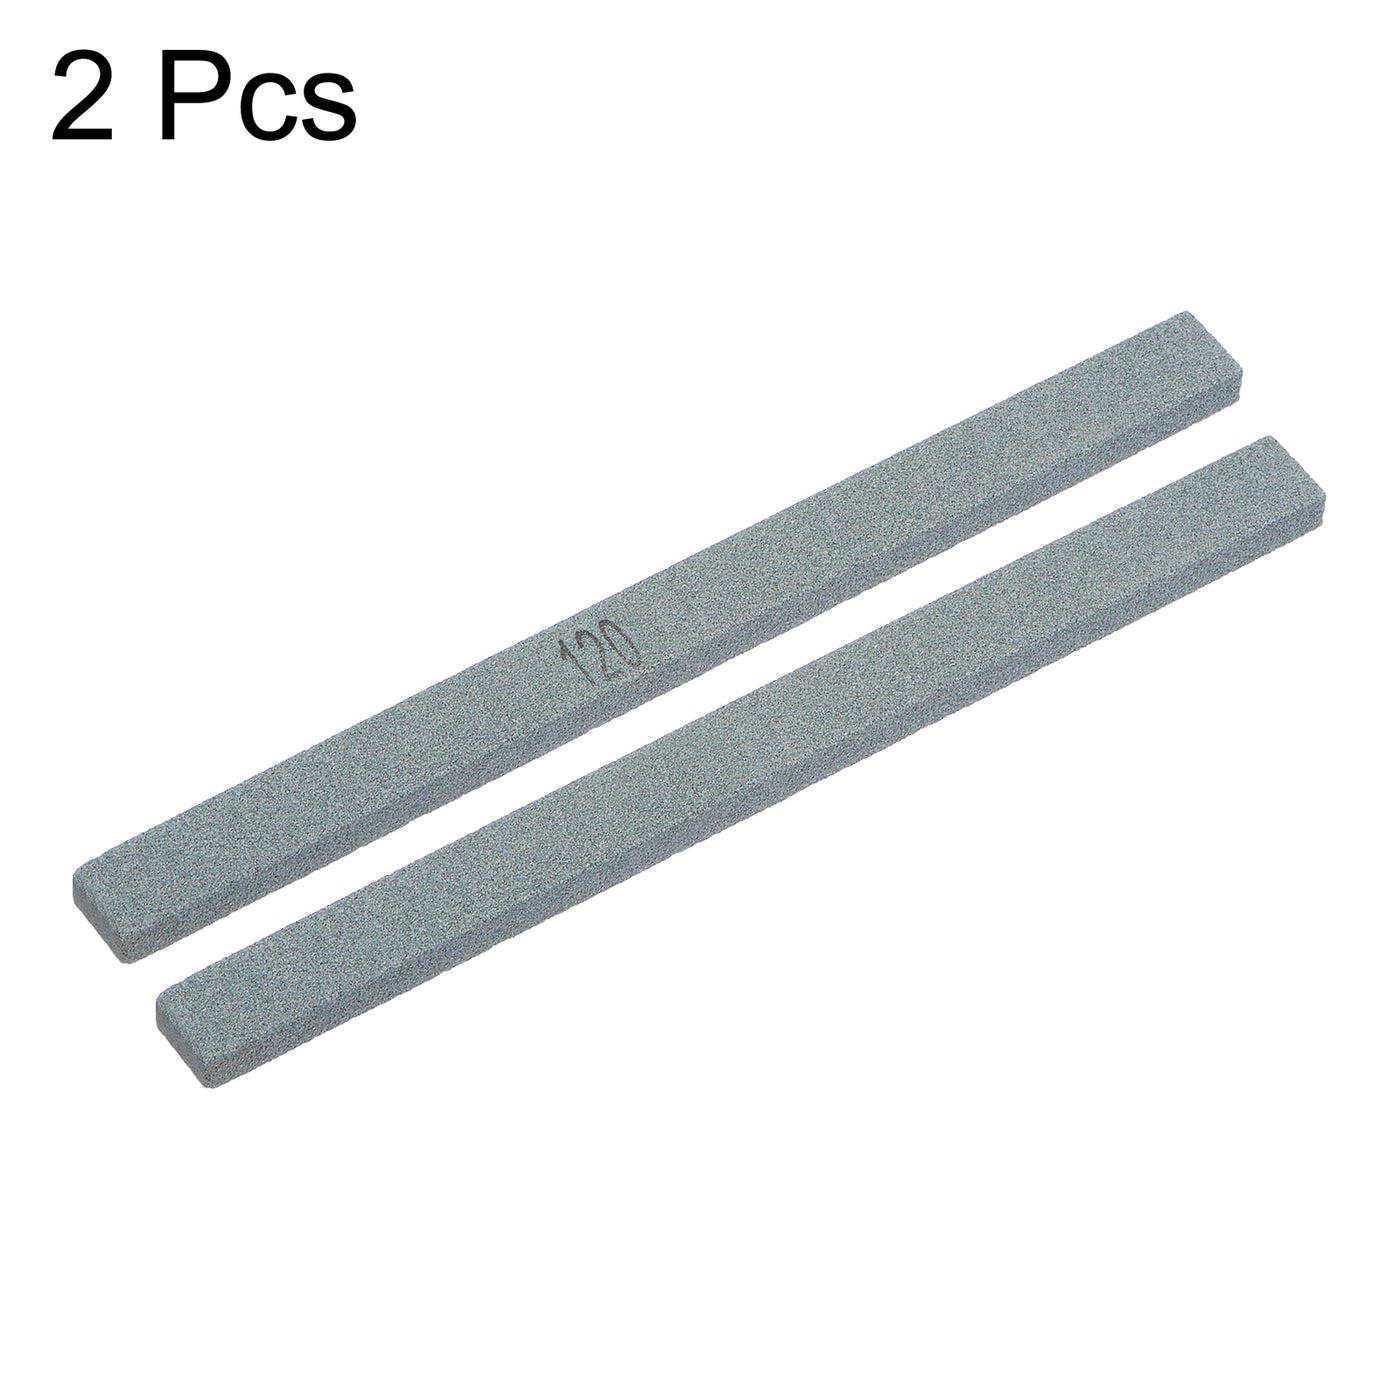 Uxcell Uxcell Sharpening Stones 180 Grit Green Silicon Carbide Polishing Stone Whetstone 2pcs